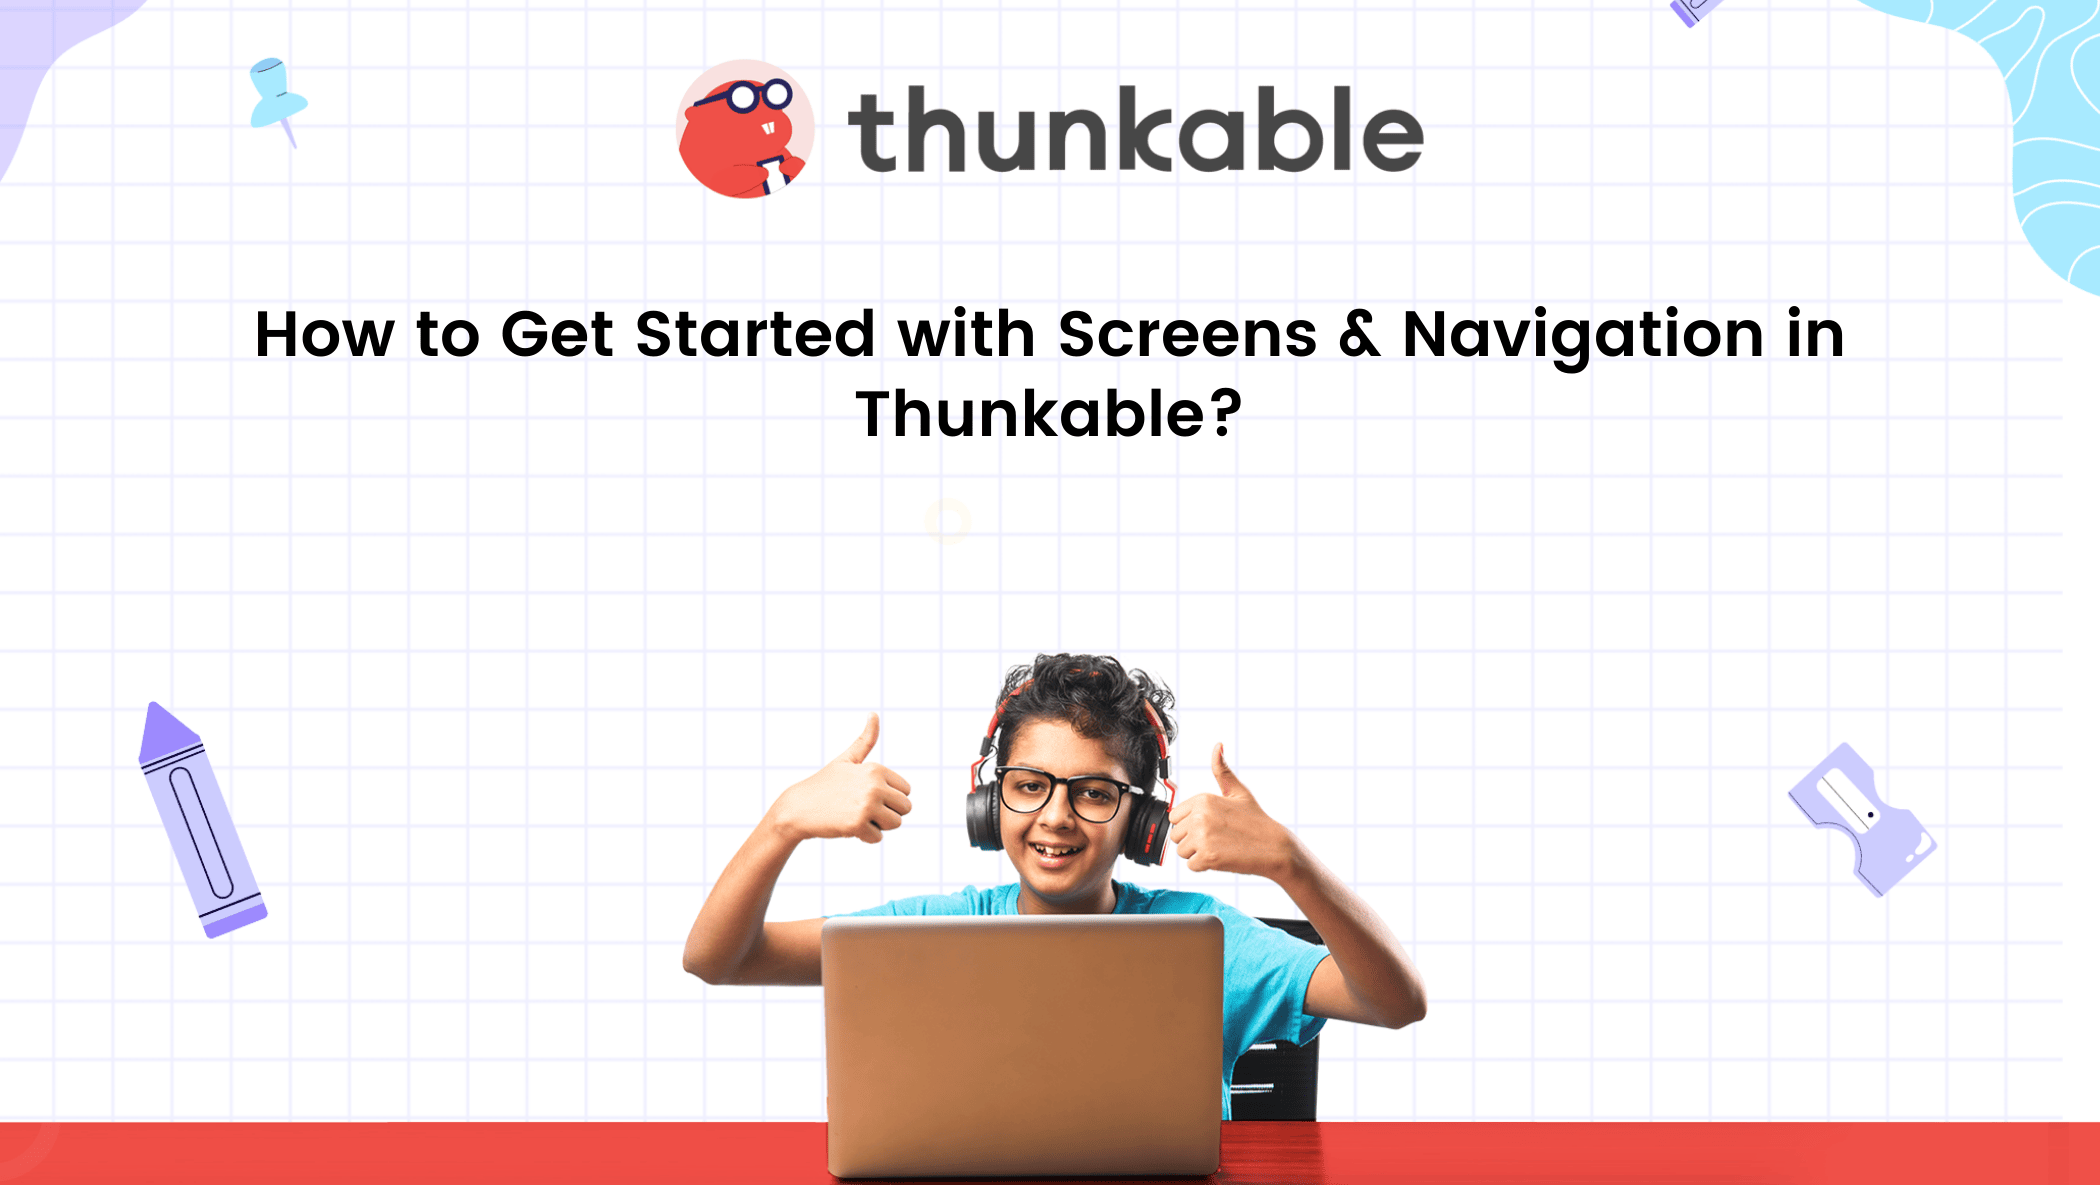 How to Get Started with Screens & Navigation in Thunkable